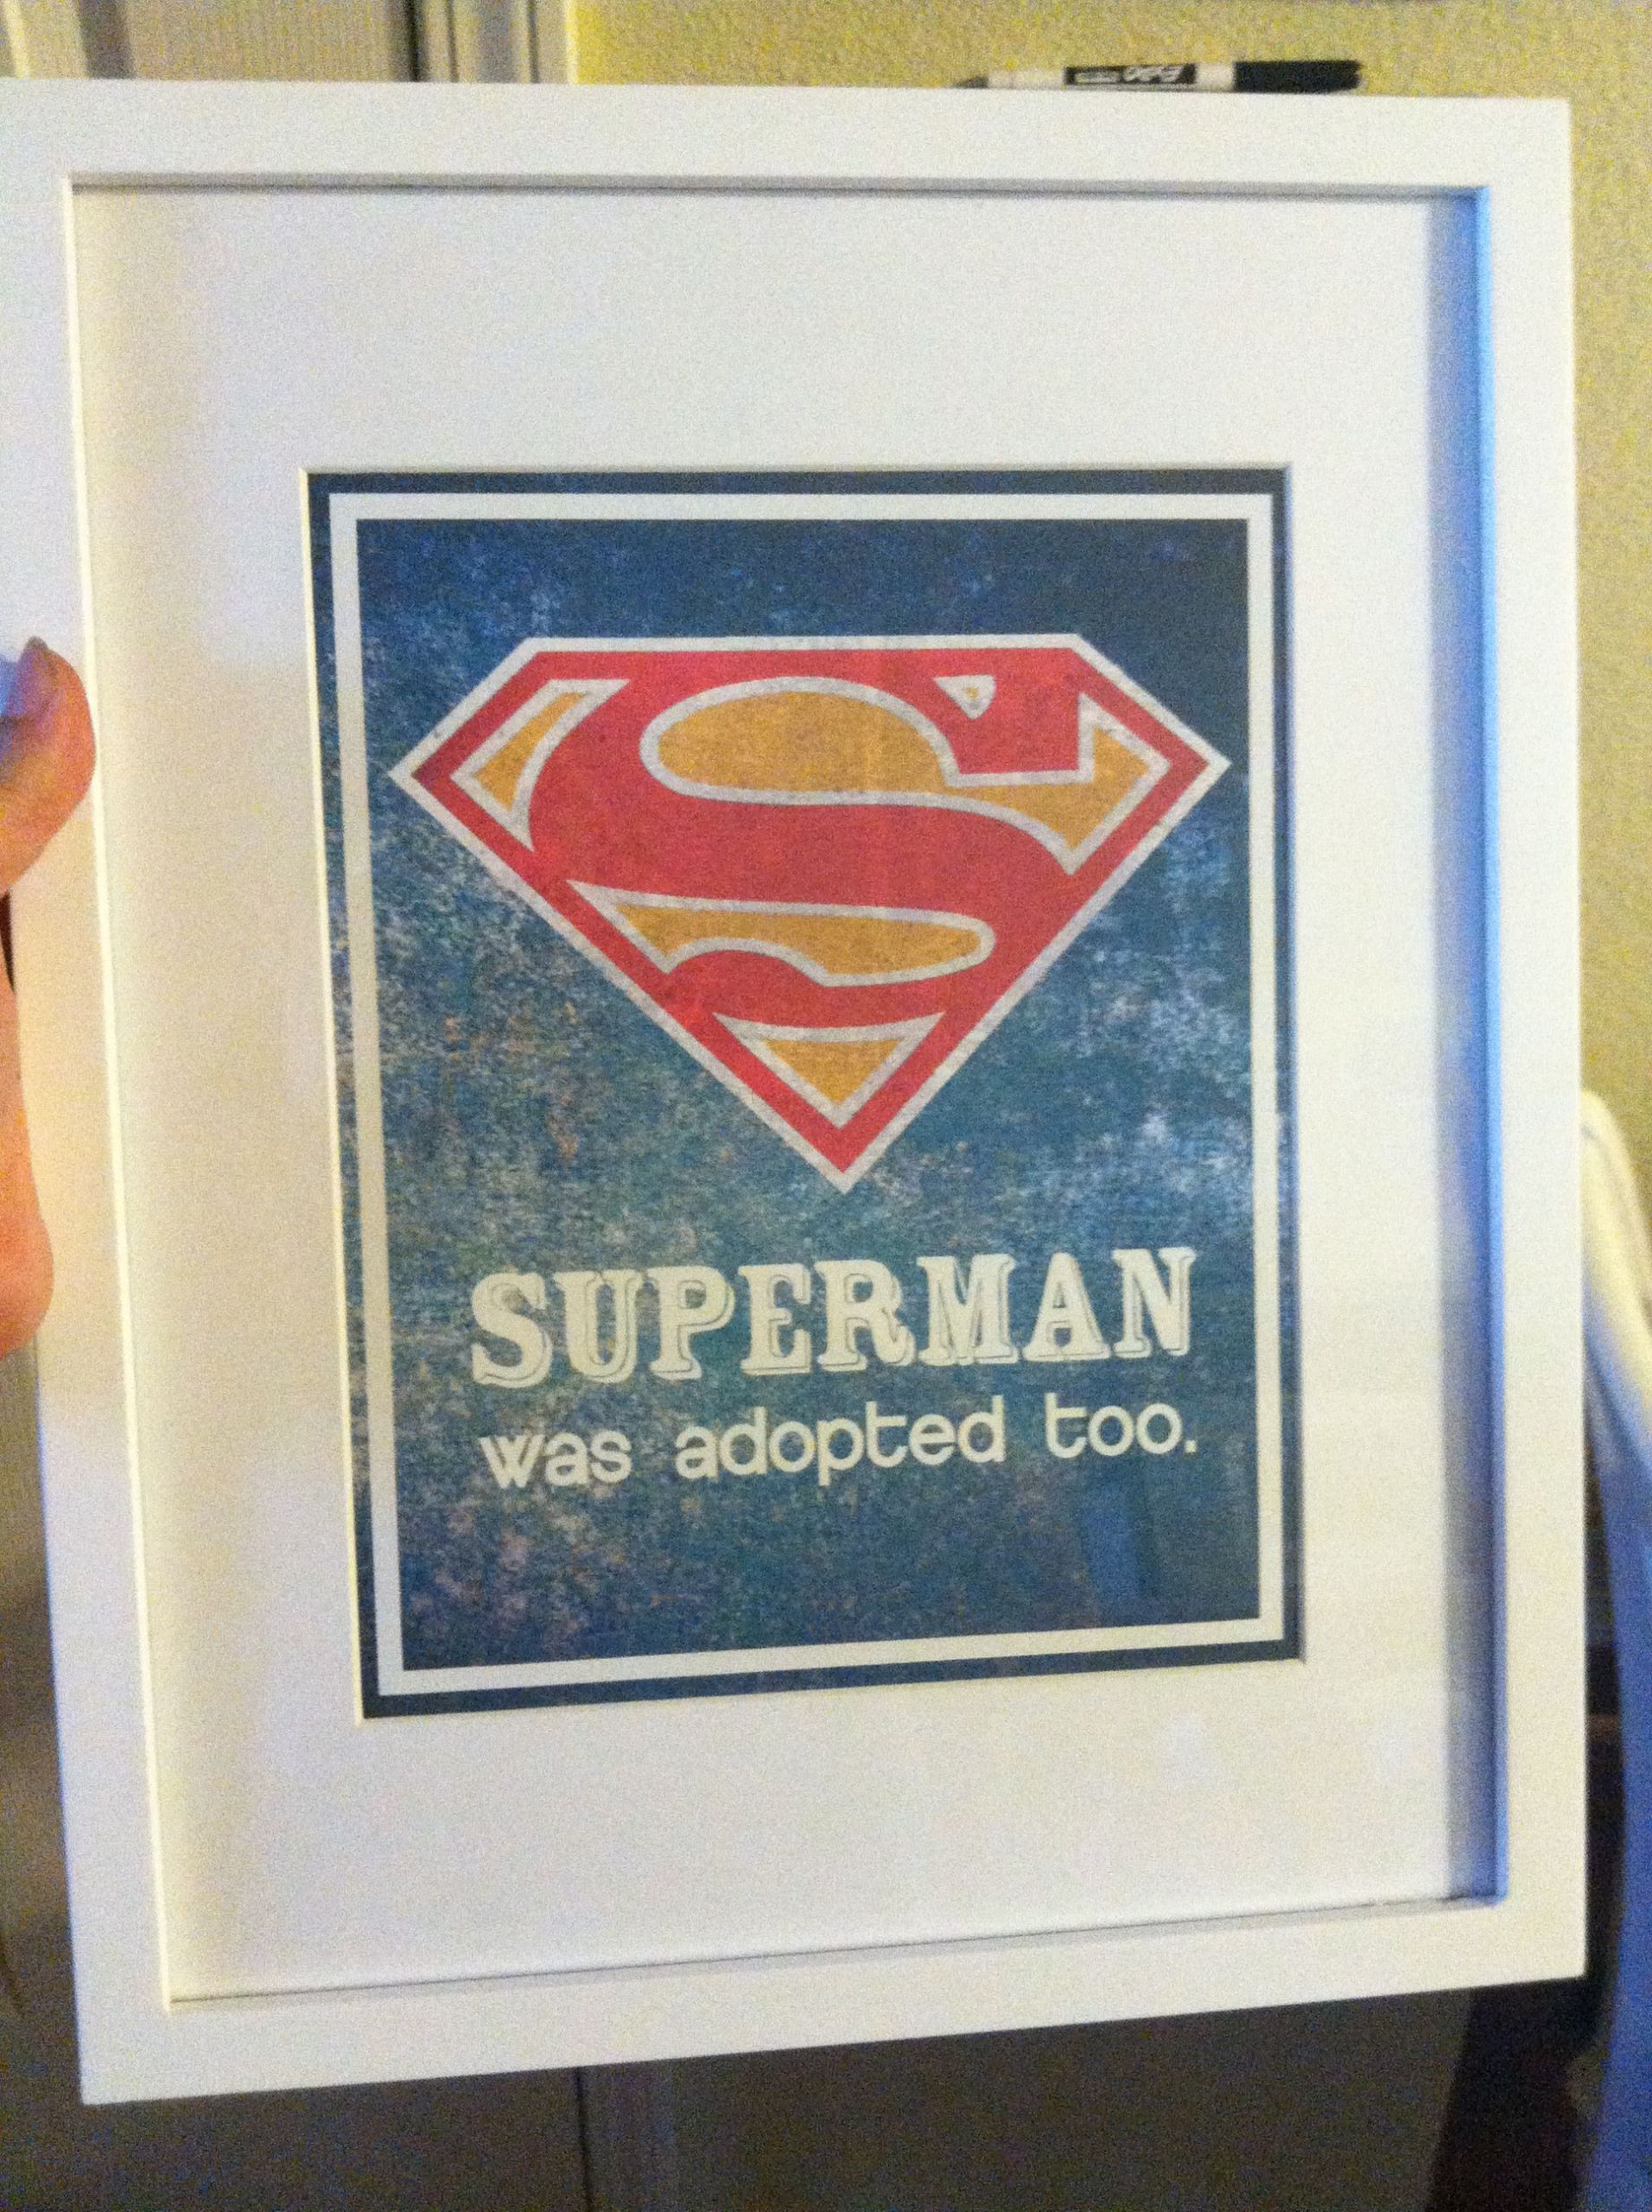 Adoption Gift Ideas For Older Child
 Adoption t for an older boy Superman was adopted too